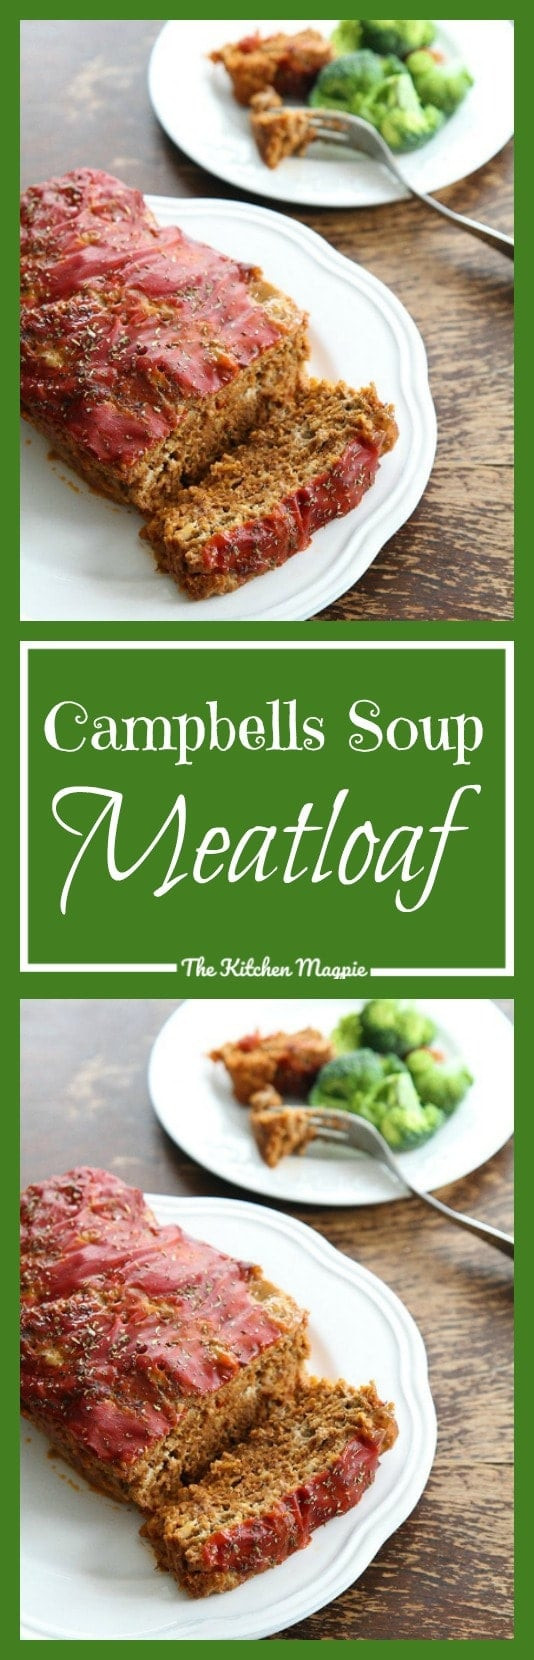 Campbell Soup Meatloaf
 Our Favorite Meatloaf From Campbell s Soup The Kitchen